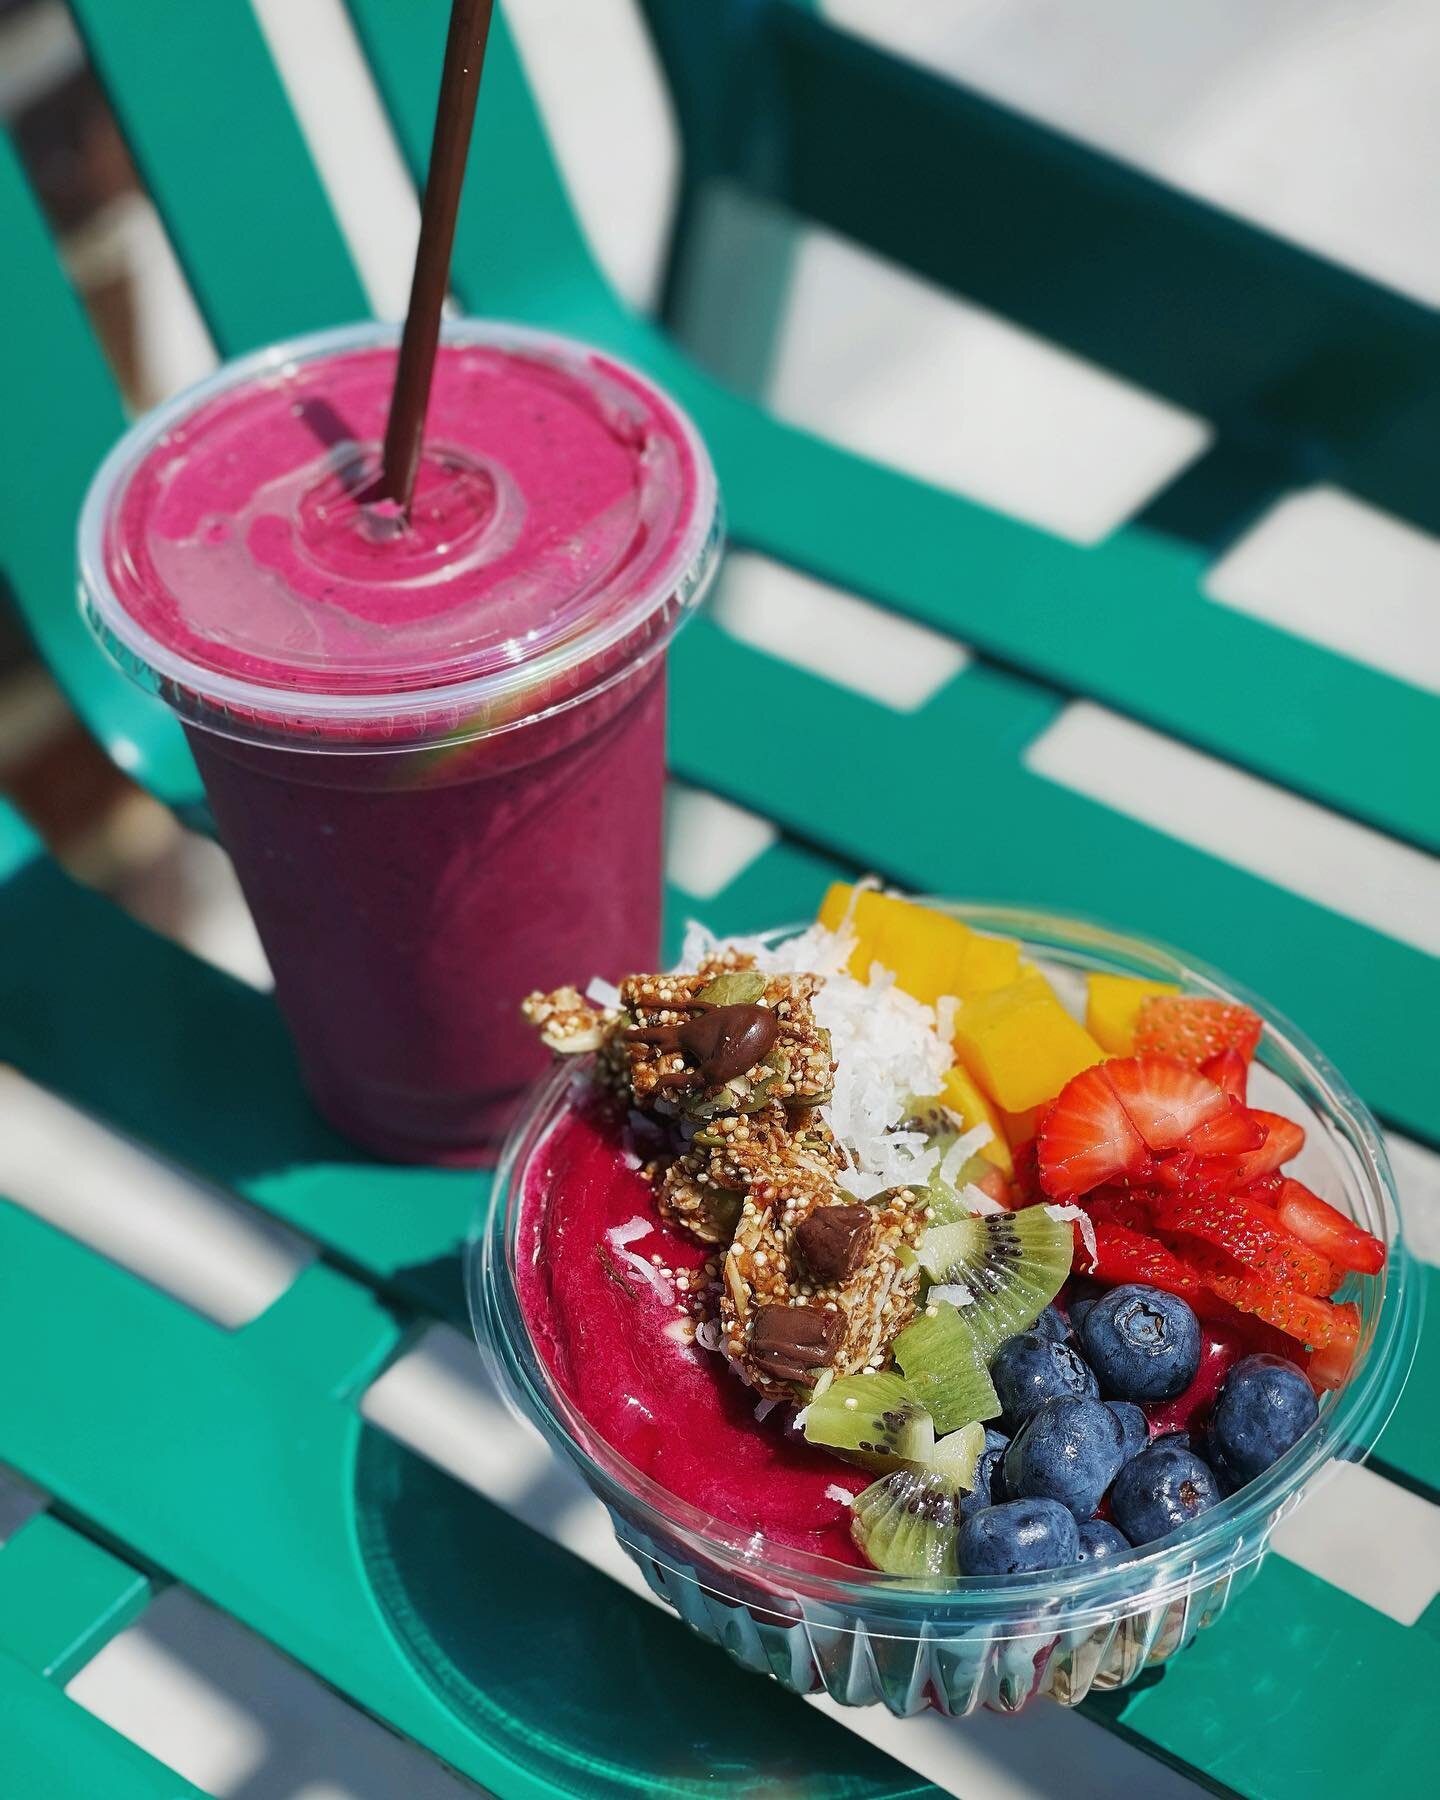 Summer time snacks : Jessie&rsquo;s pitaya bowl &amp; a pitaya smoothie (add peanut butter, trust us&hellip;the combo is perfection) 🌞🤤 swing by before or after the beach to cool down and fuel up #jessiesoflinwood #coffeecreamcommunity
.
.
.

#coff